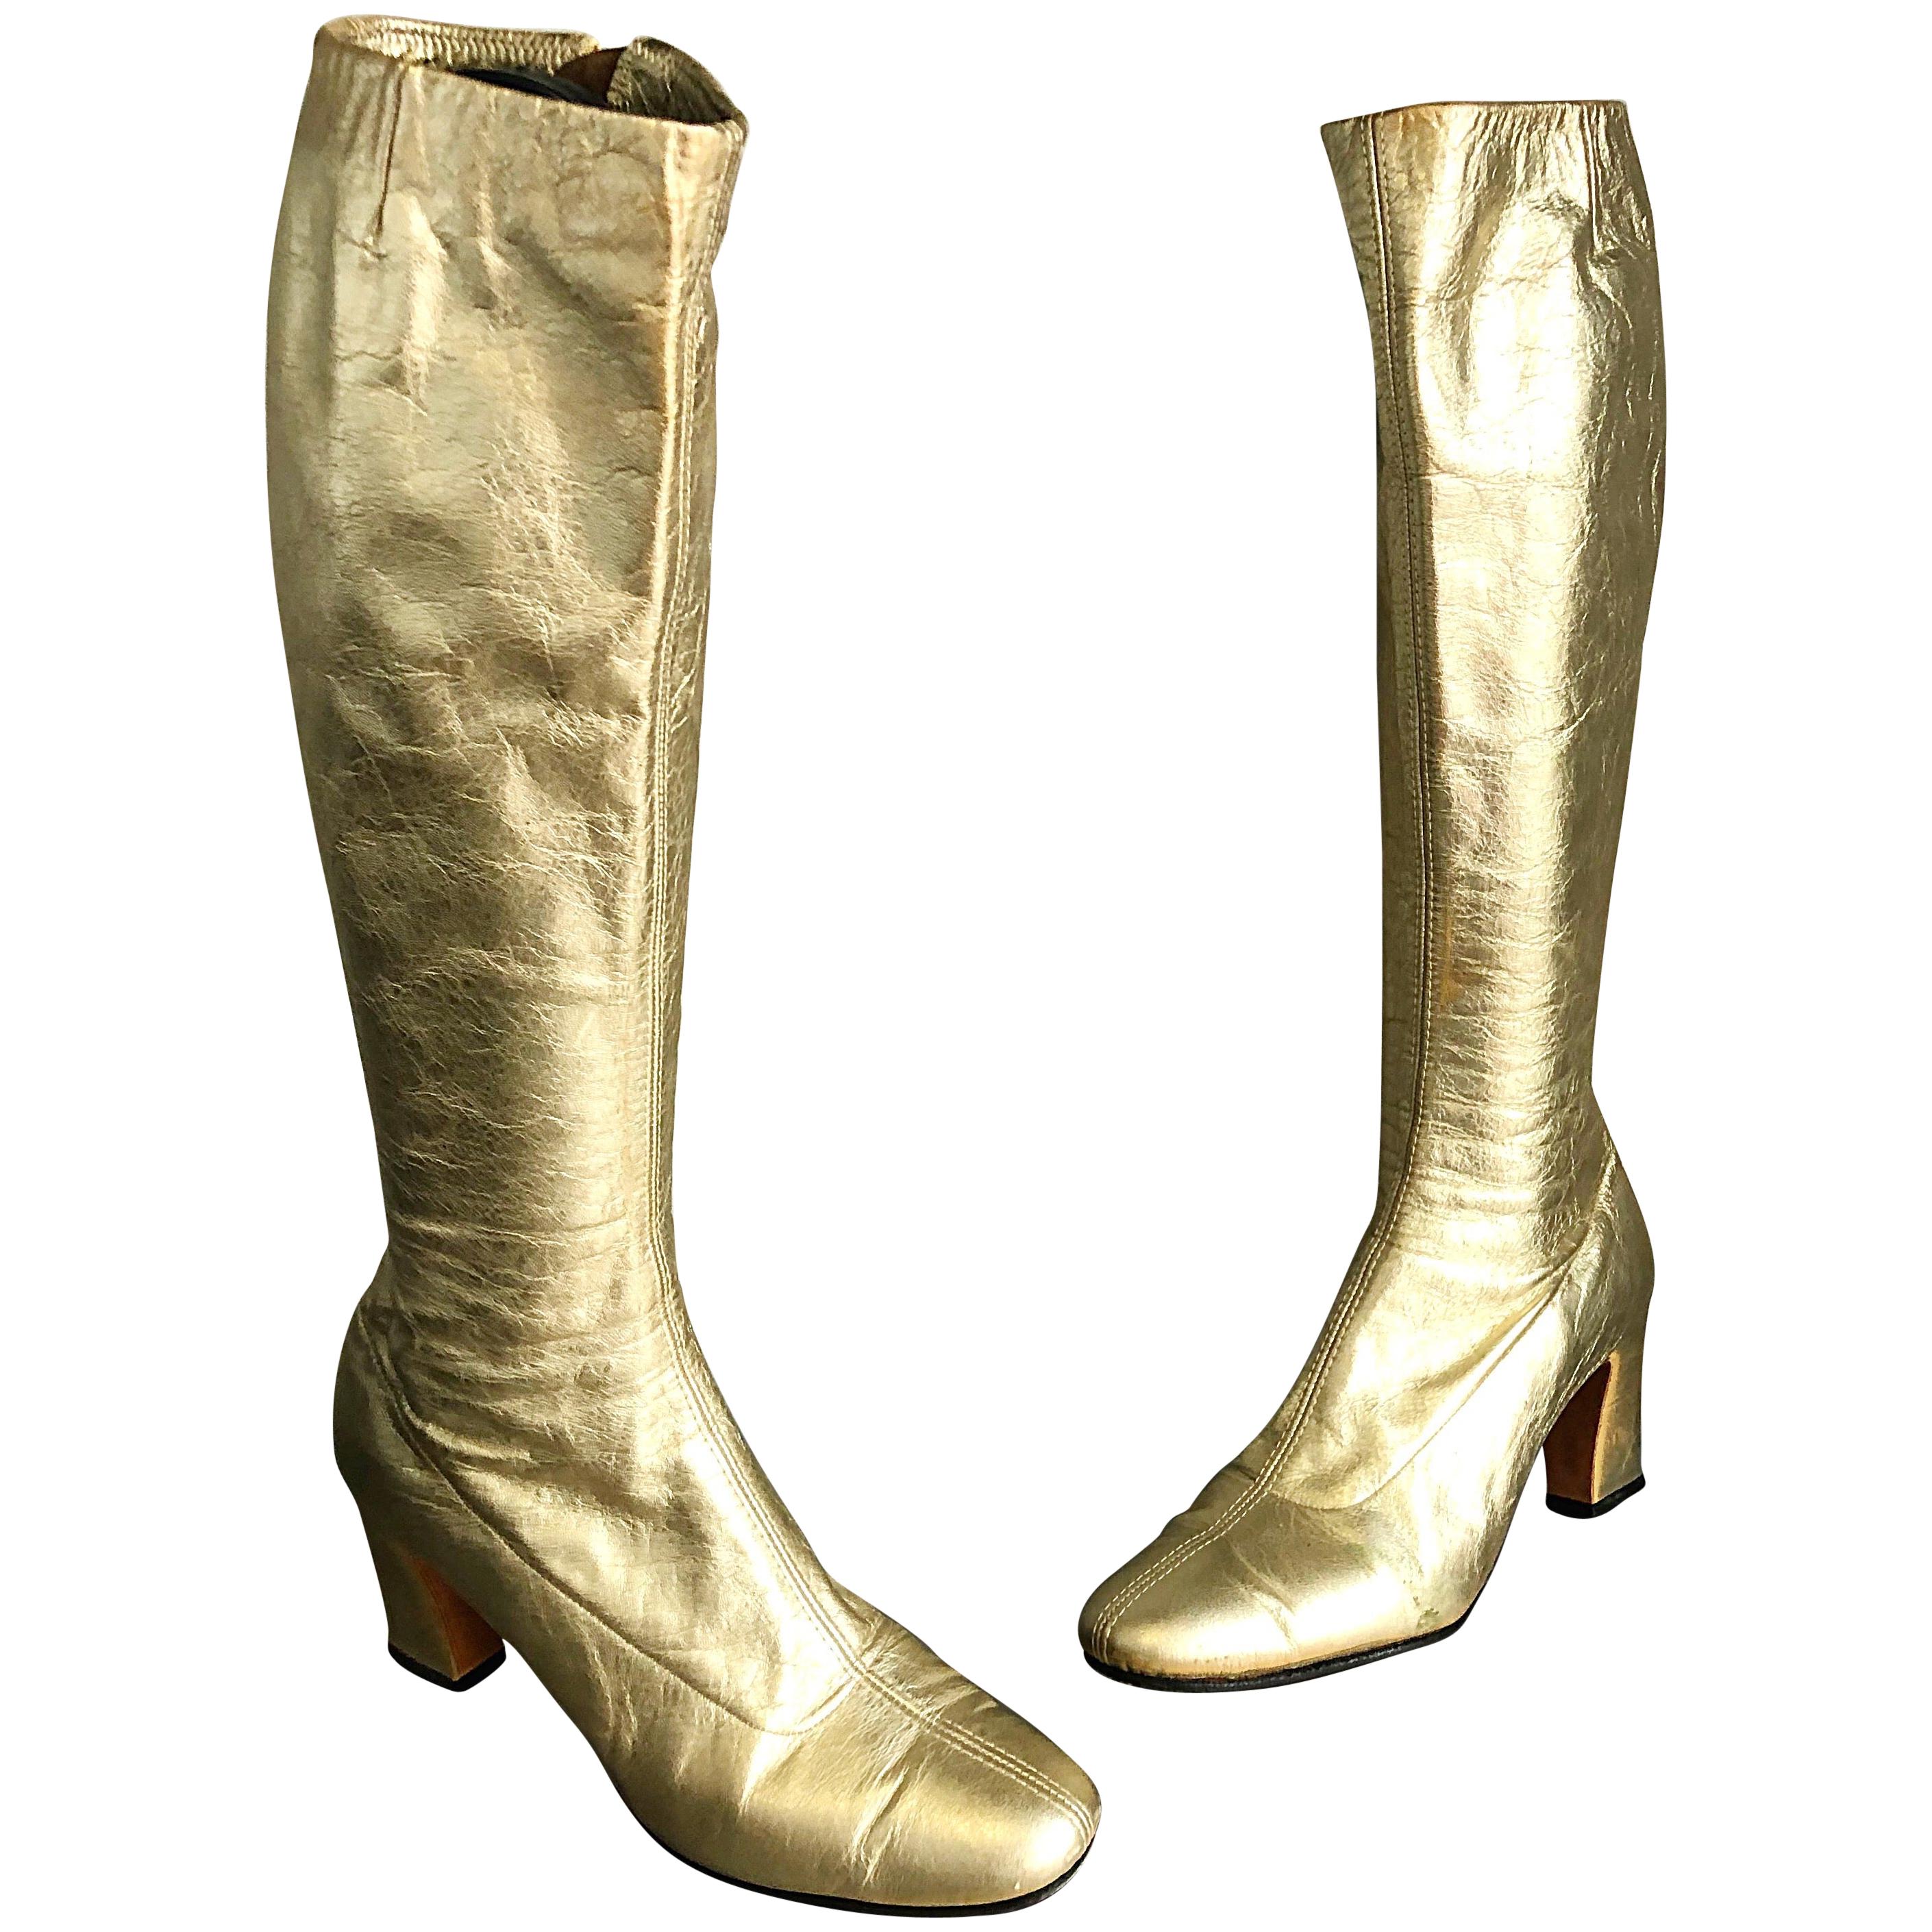 1960s Gold Leather Size 6 N Knee High Vintage 60s Mod Retro Go-Go Boots Shoes